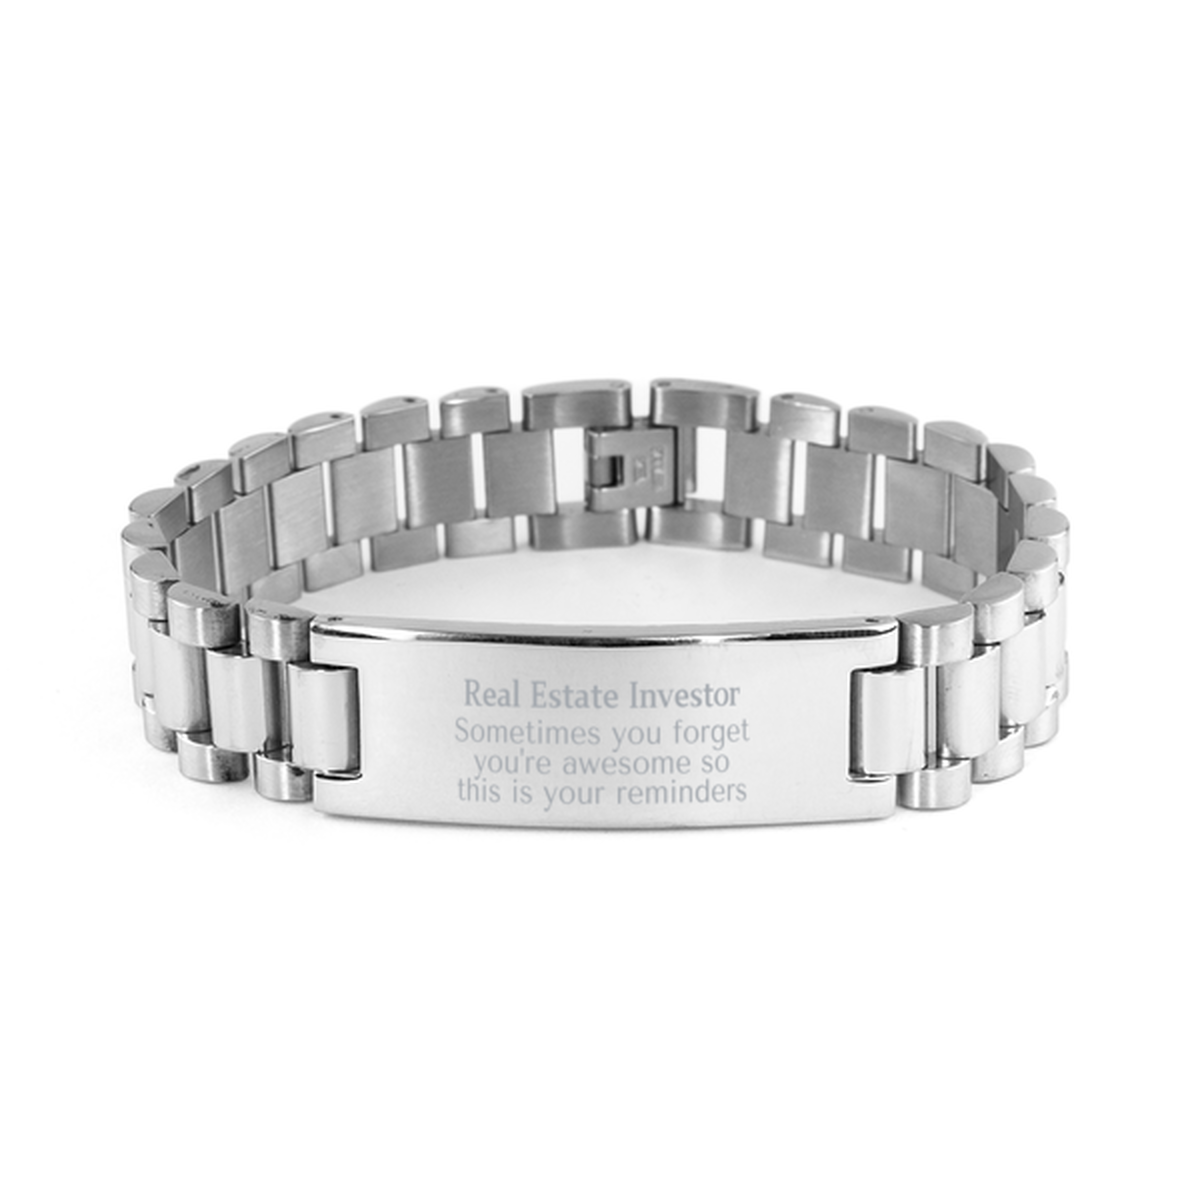 Sentimental Real Estate Investor Ladder Stainless Steel Bracelet, Real Estate Investor Sometimes you forget you're awesome so this is your reminders, Graduation Christmas Birthday Gifts for Real Estate Investor, Men, Women, Coworkers